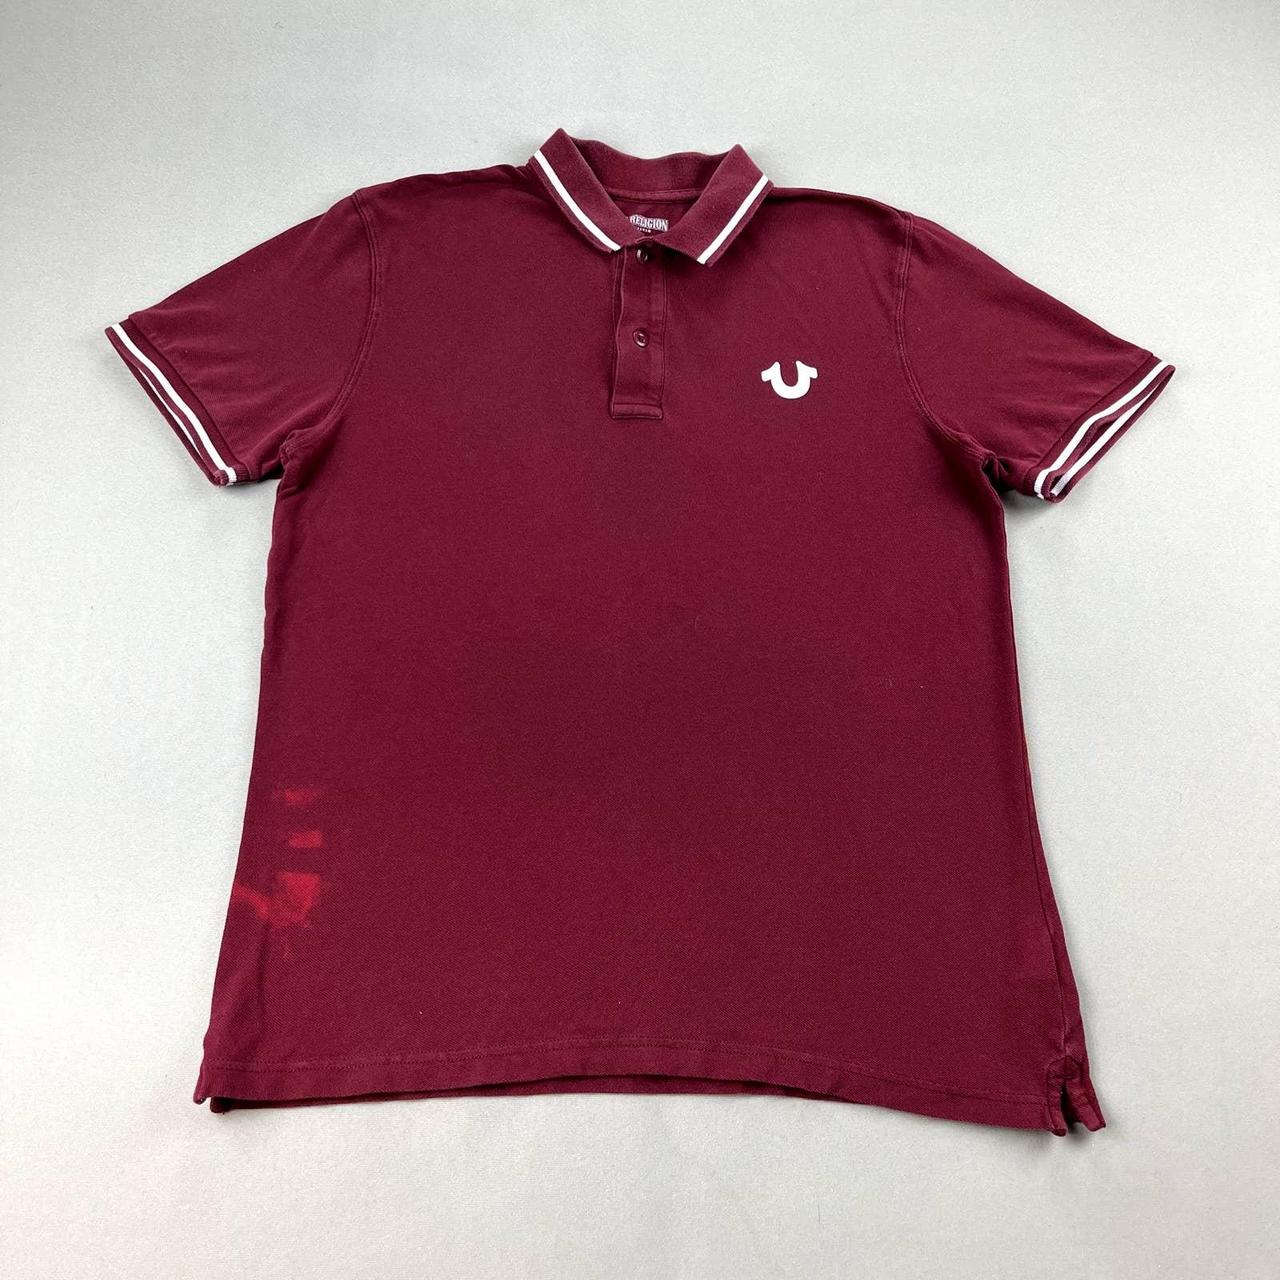 True Religion Men's Red and White Polo-shirts | Depop